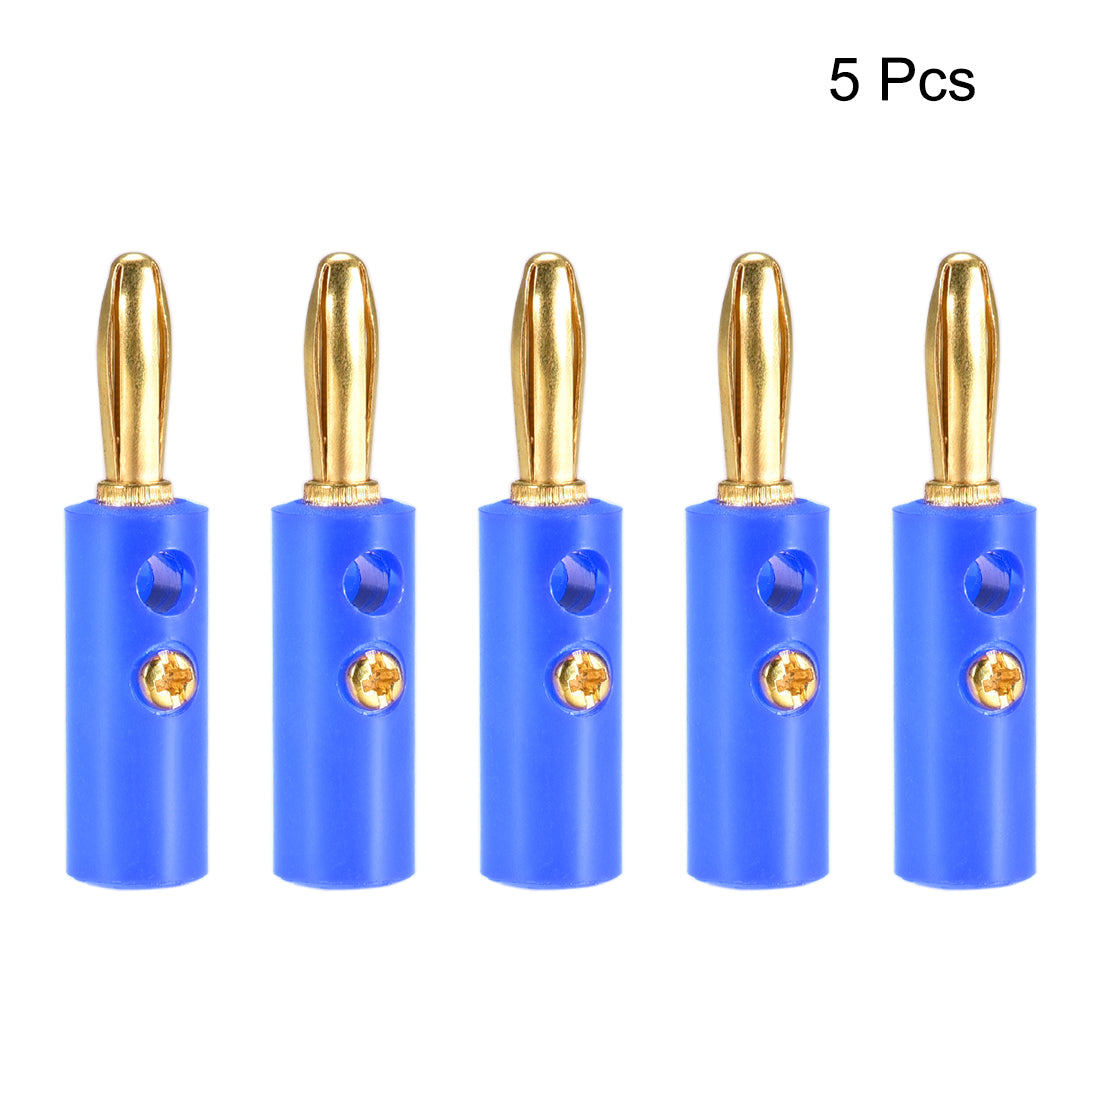 uxcell Uxcell 4mm Banana Speaker Wire Cable Screw Plugs Connectors Gold Blue 5pcs Jack Connector